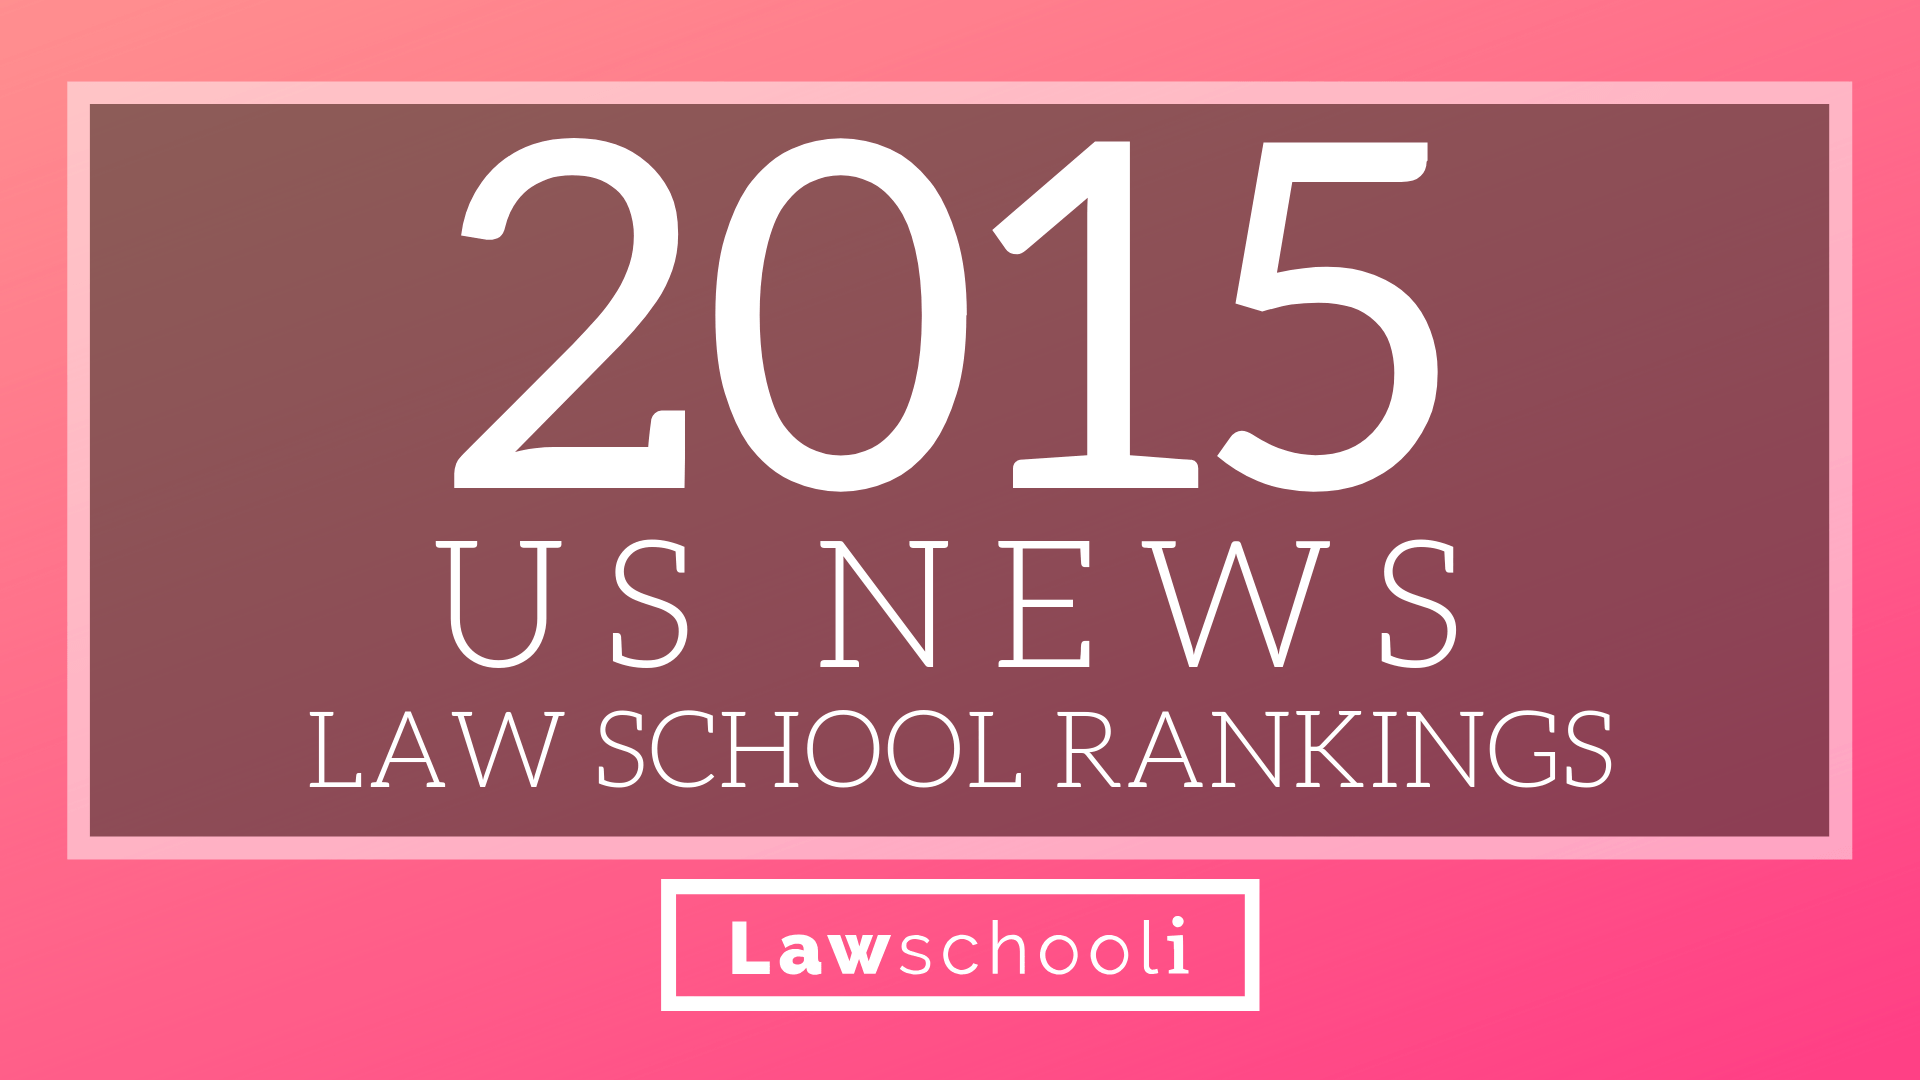 The 2015 US News Law School Rankings Are Out! LawSchooli